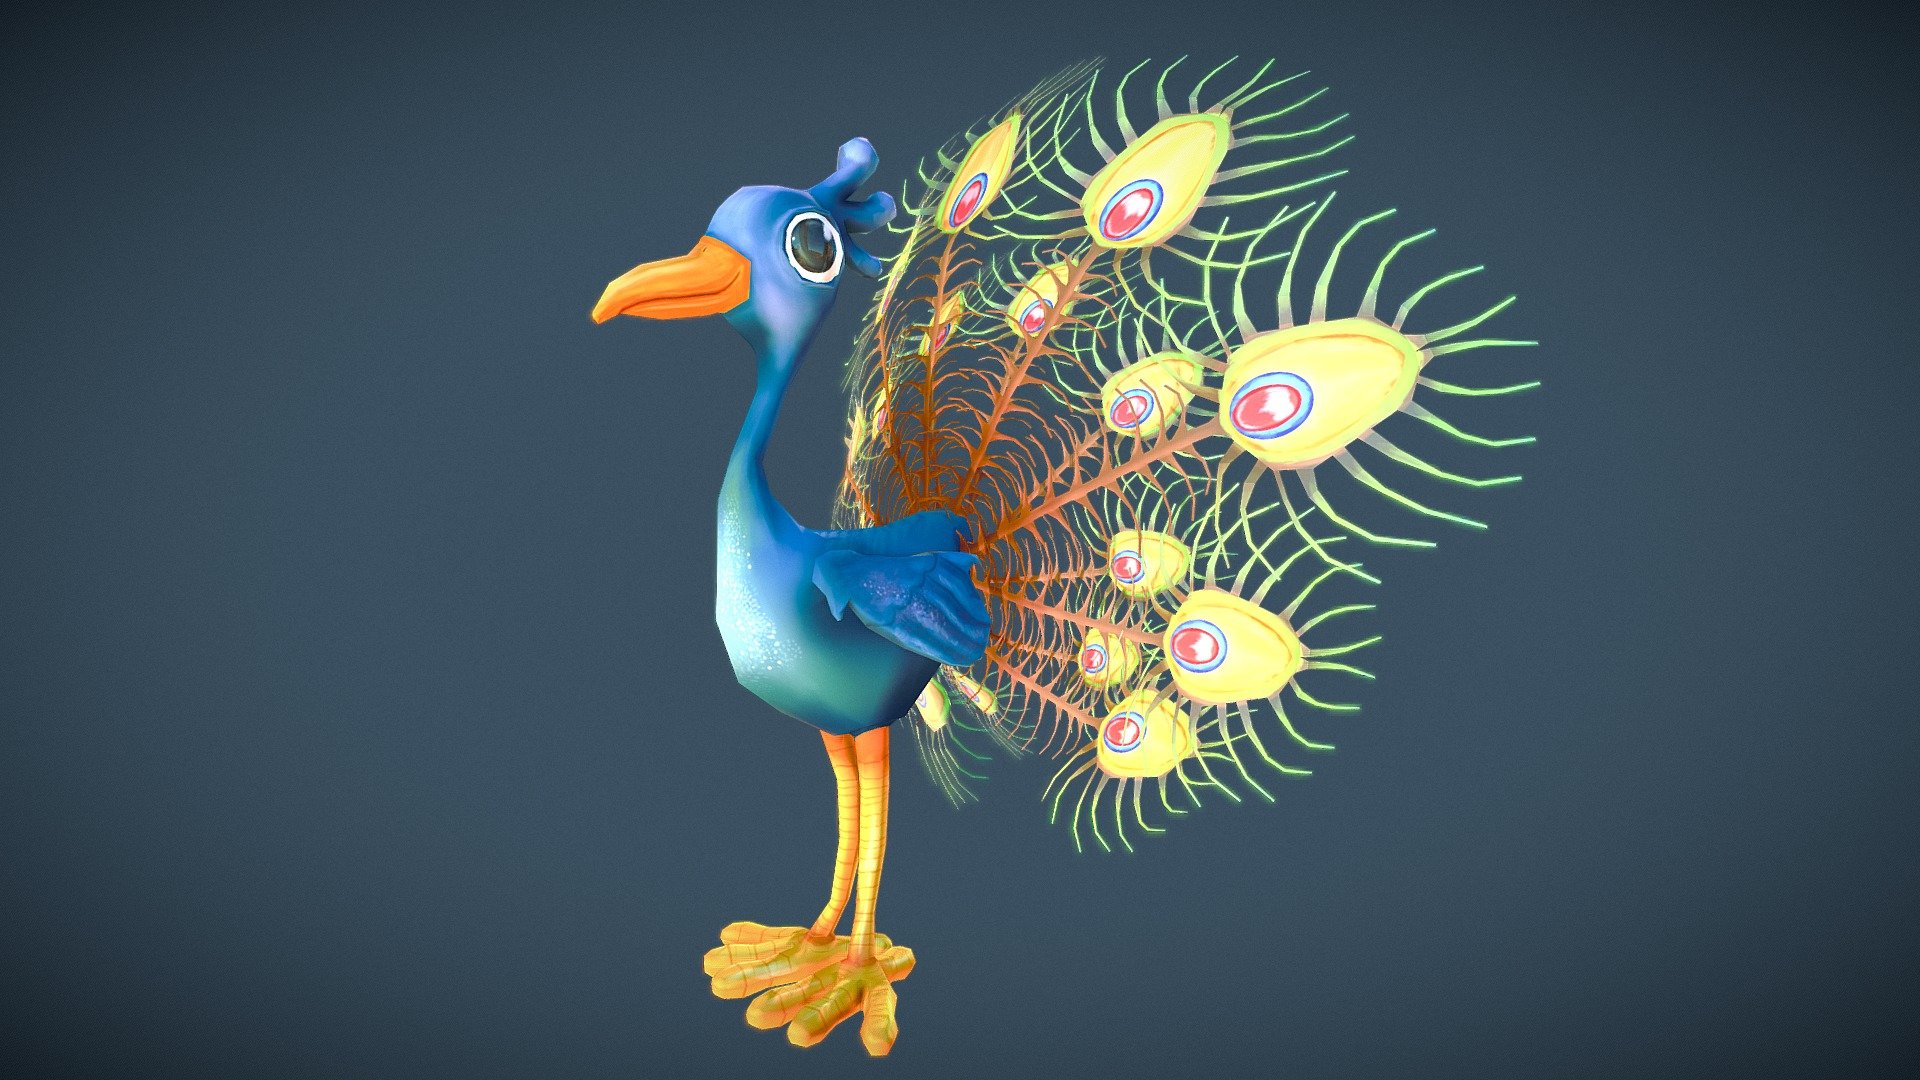 I made this Peacock on Maya, and use Mari for texture - Cartoon Paon // Peacock - 3D model by charlottecarda 3d model